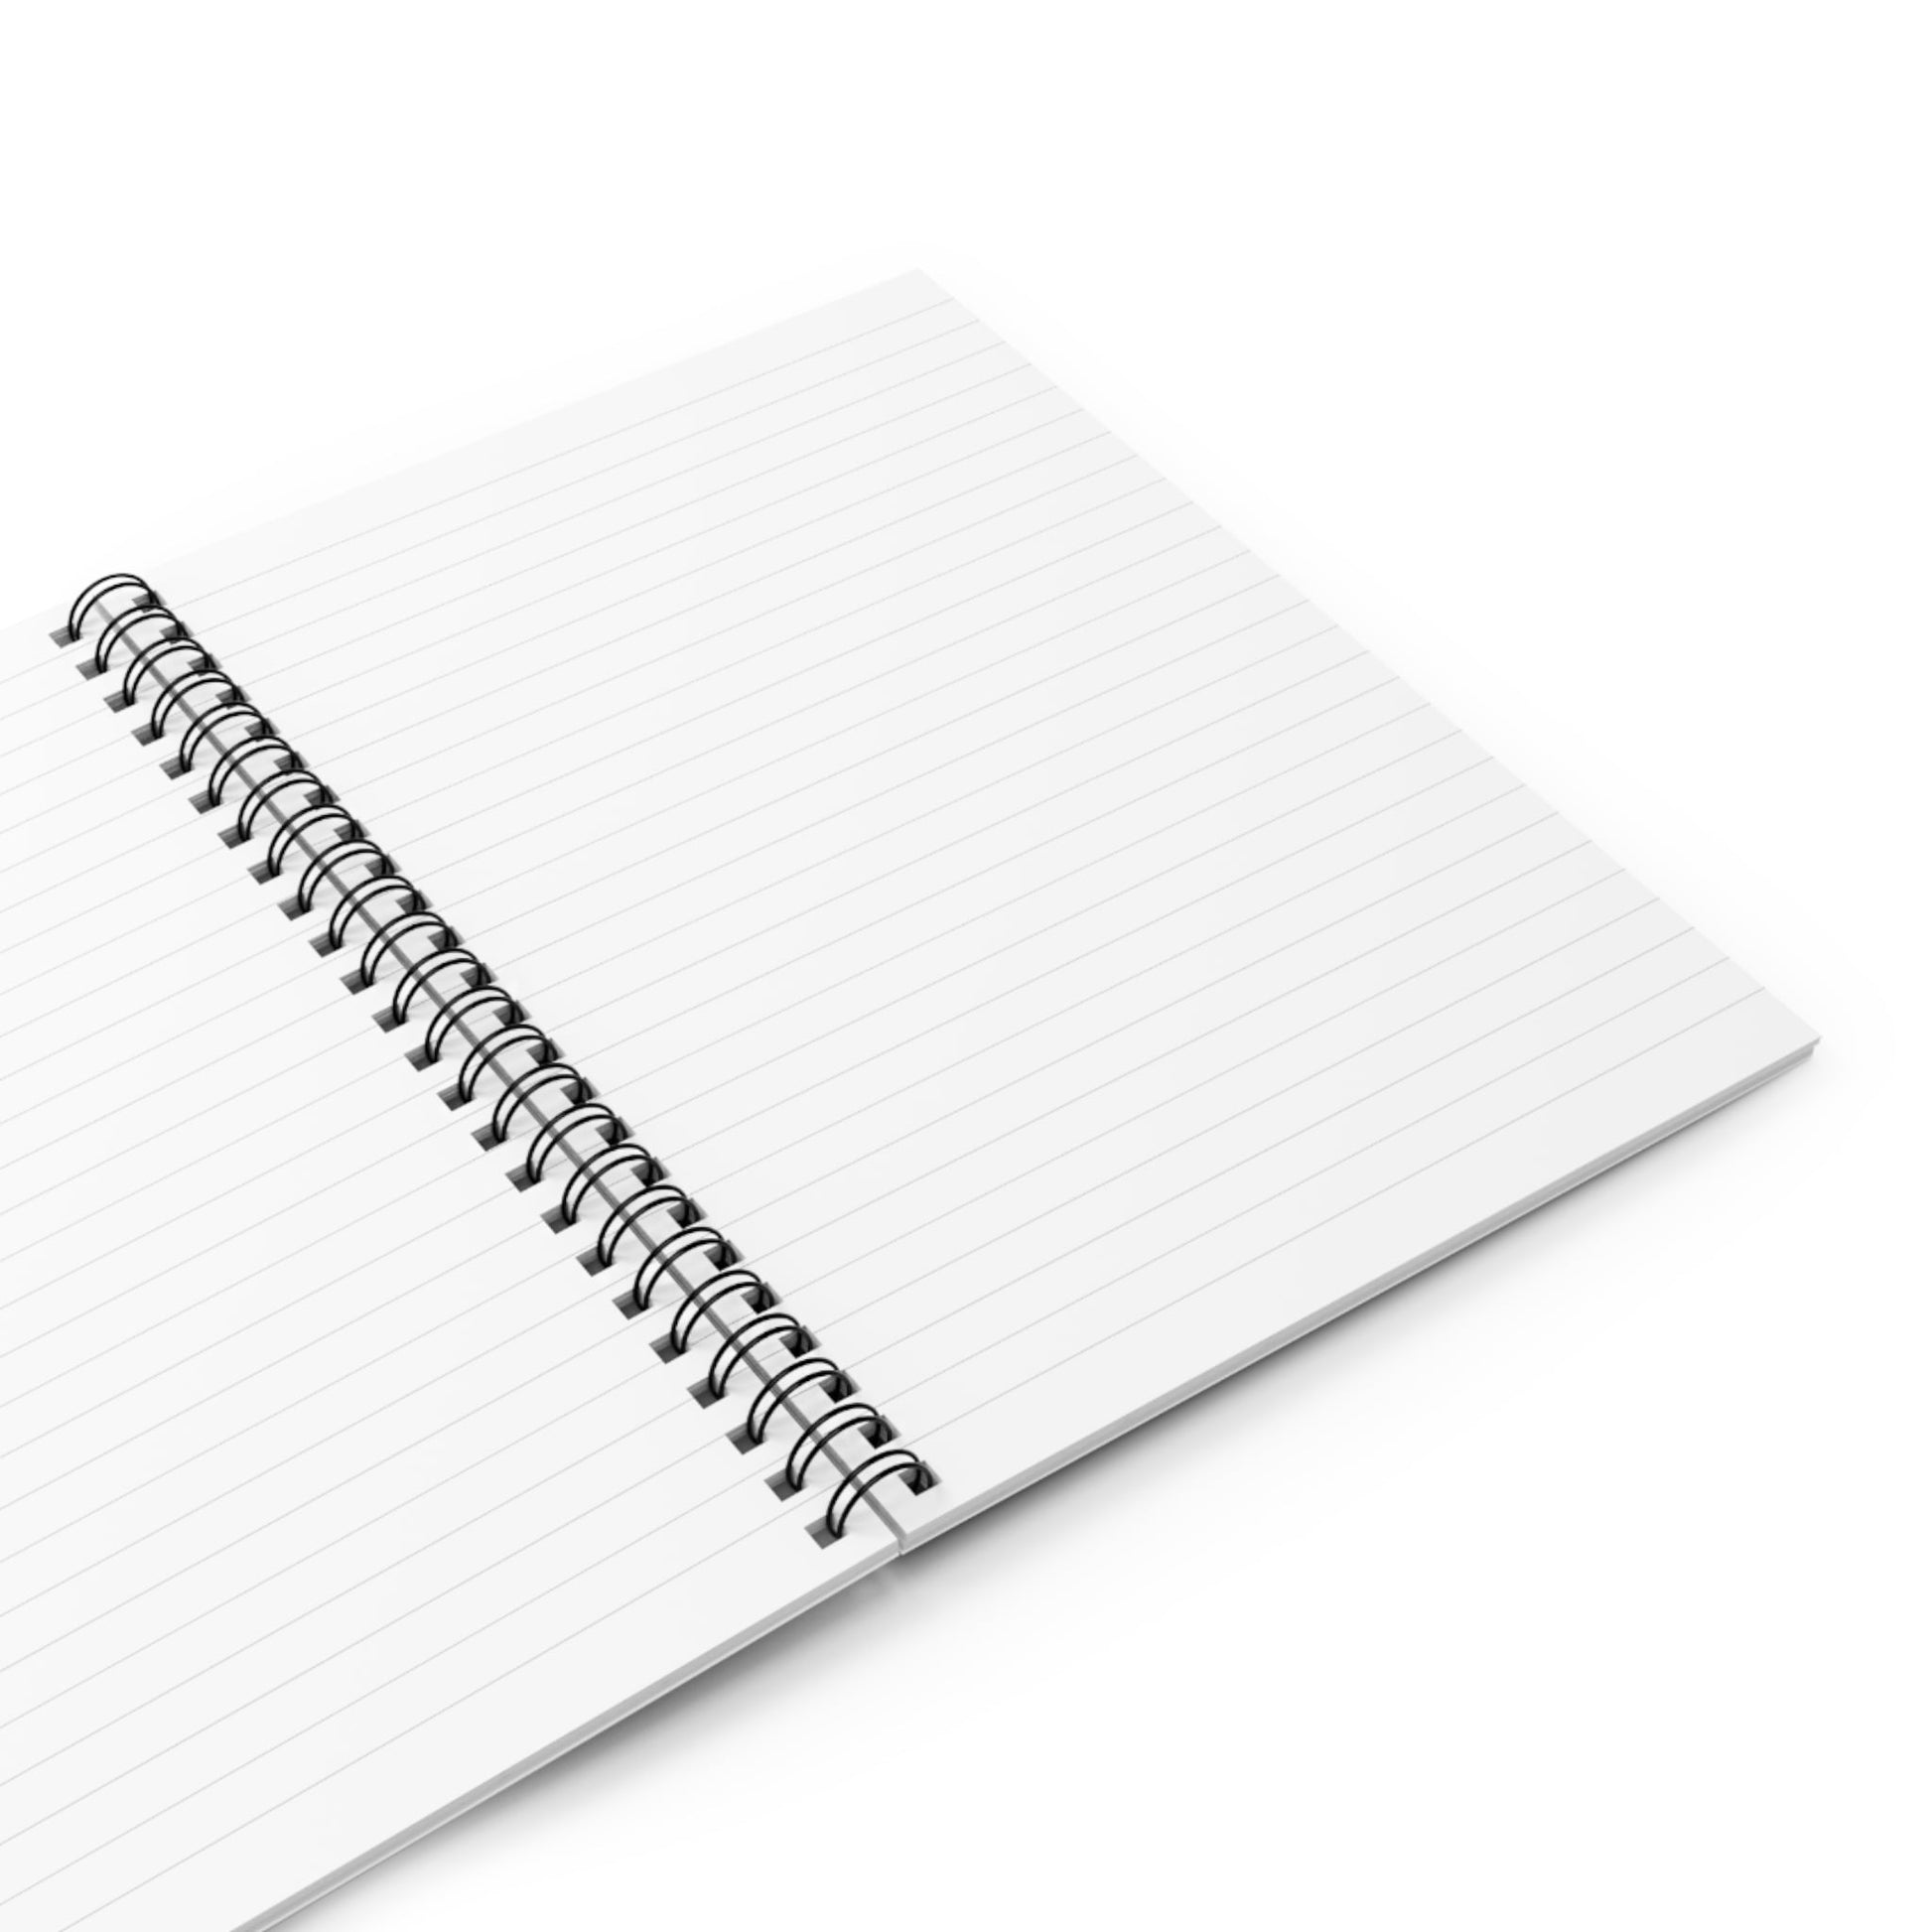 Spiral Notebook with Sensual Posing Cover Opened with Blank White College Ruled Pages